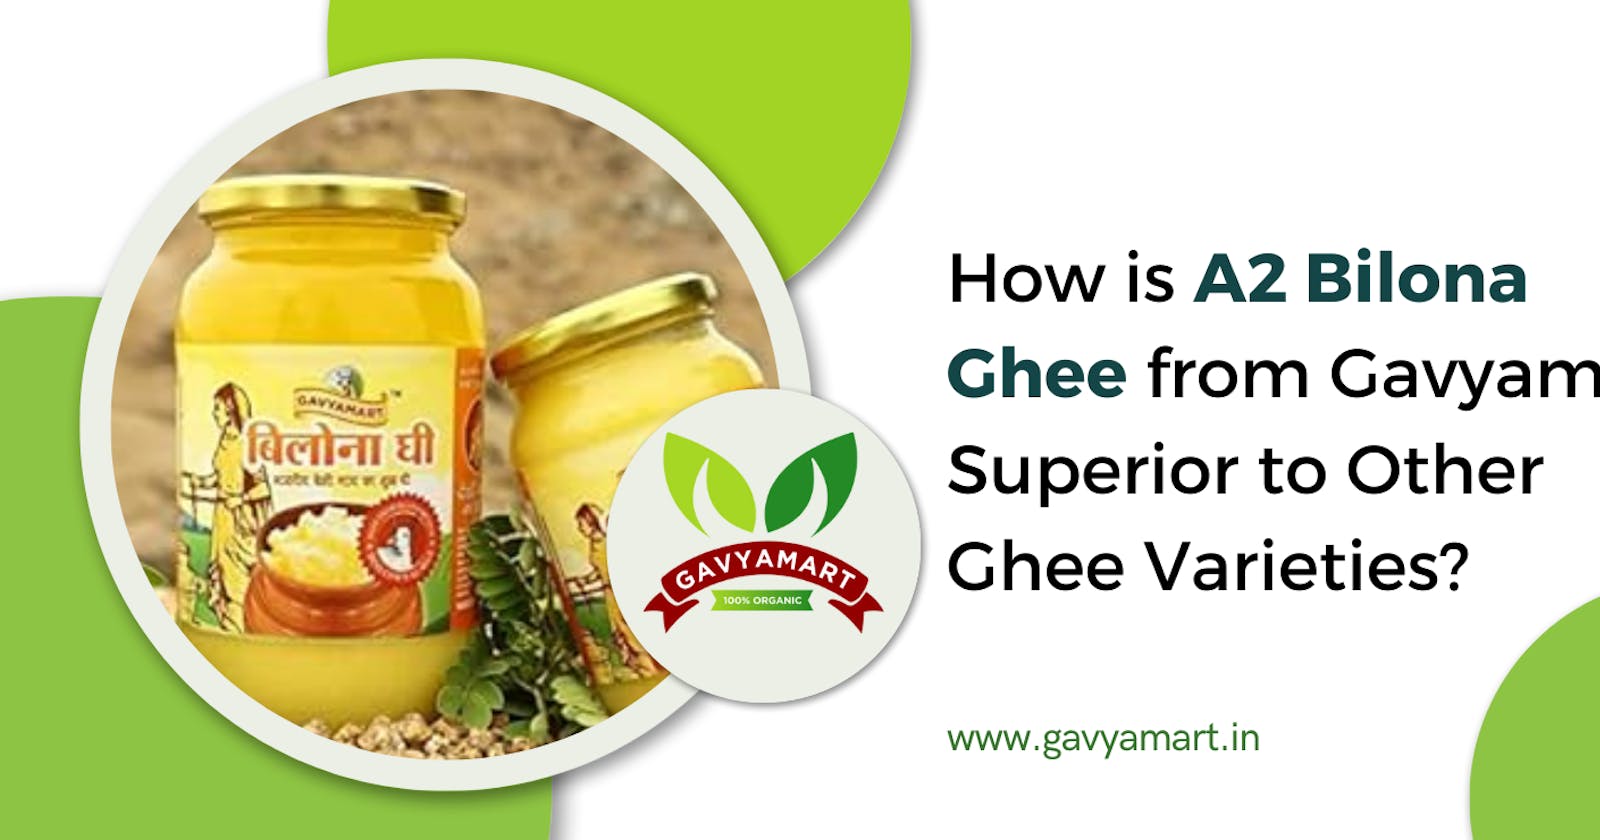 How is A2 Bilona Ghee from Gavyamart Superior to Other Ghee Varieties?